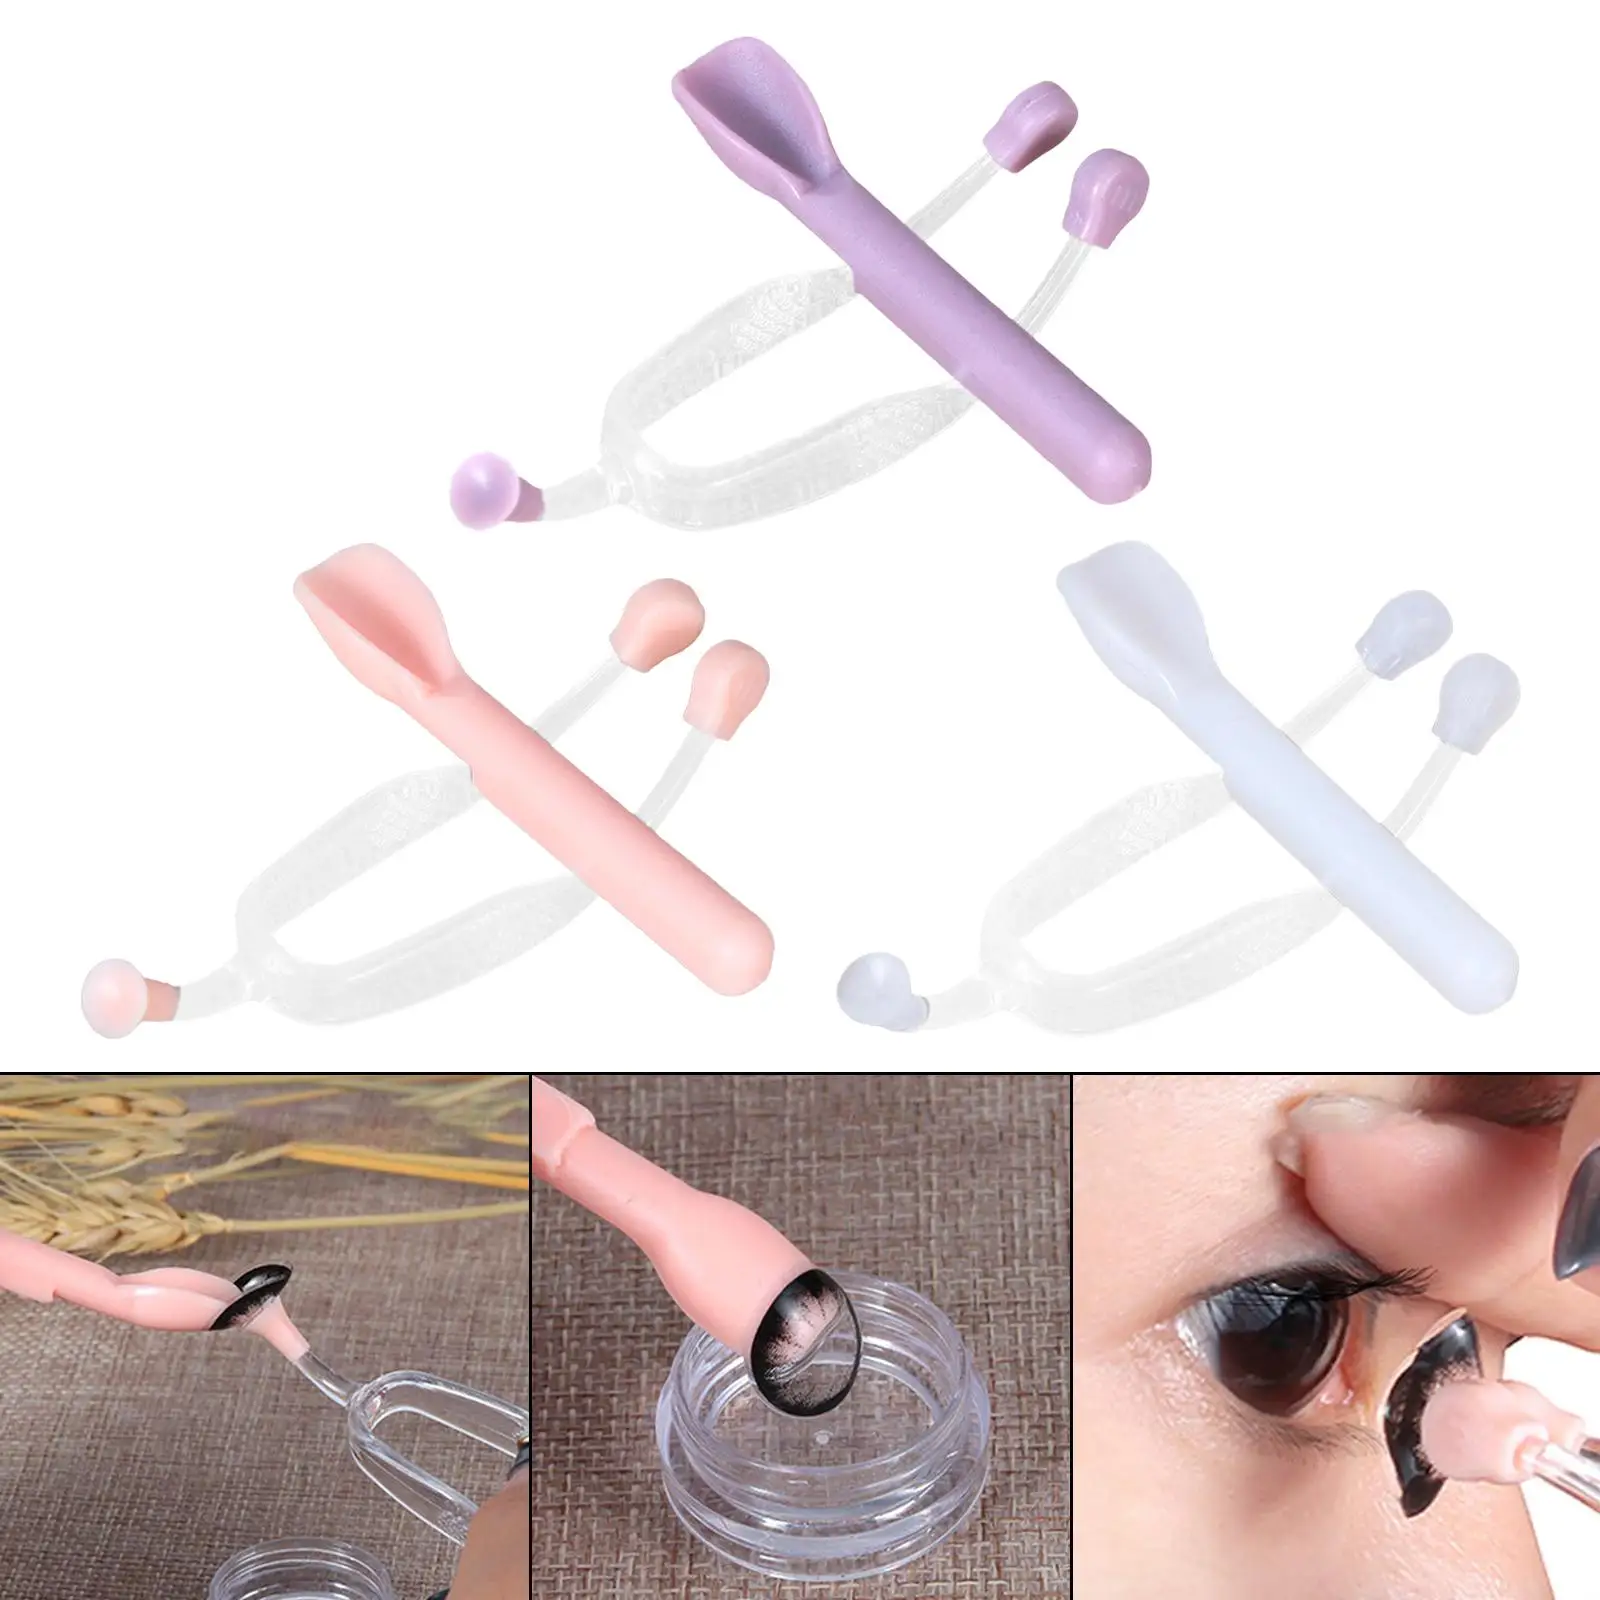 e Remover Tool Insertion Removal Solution Stick for New User